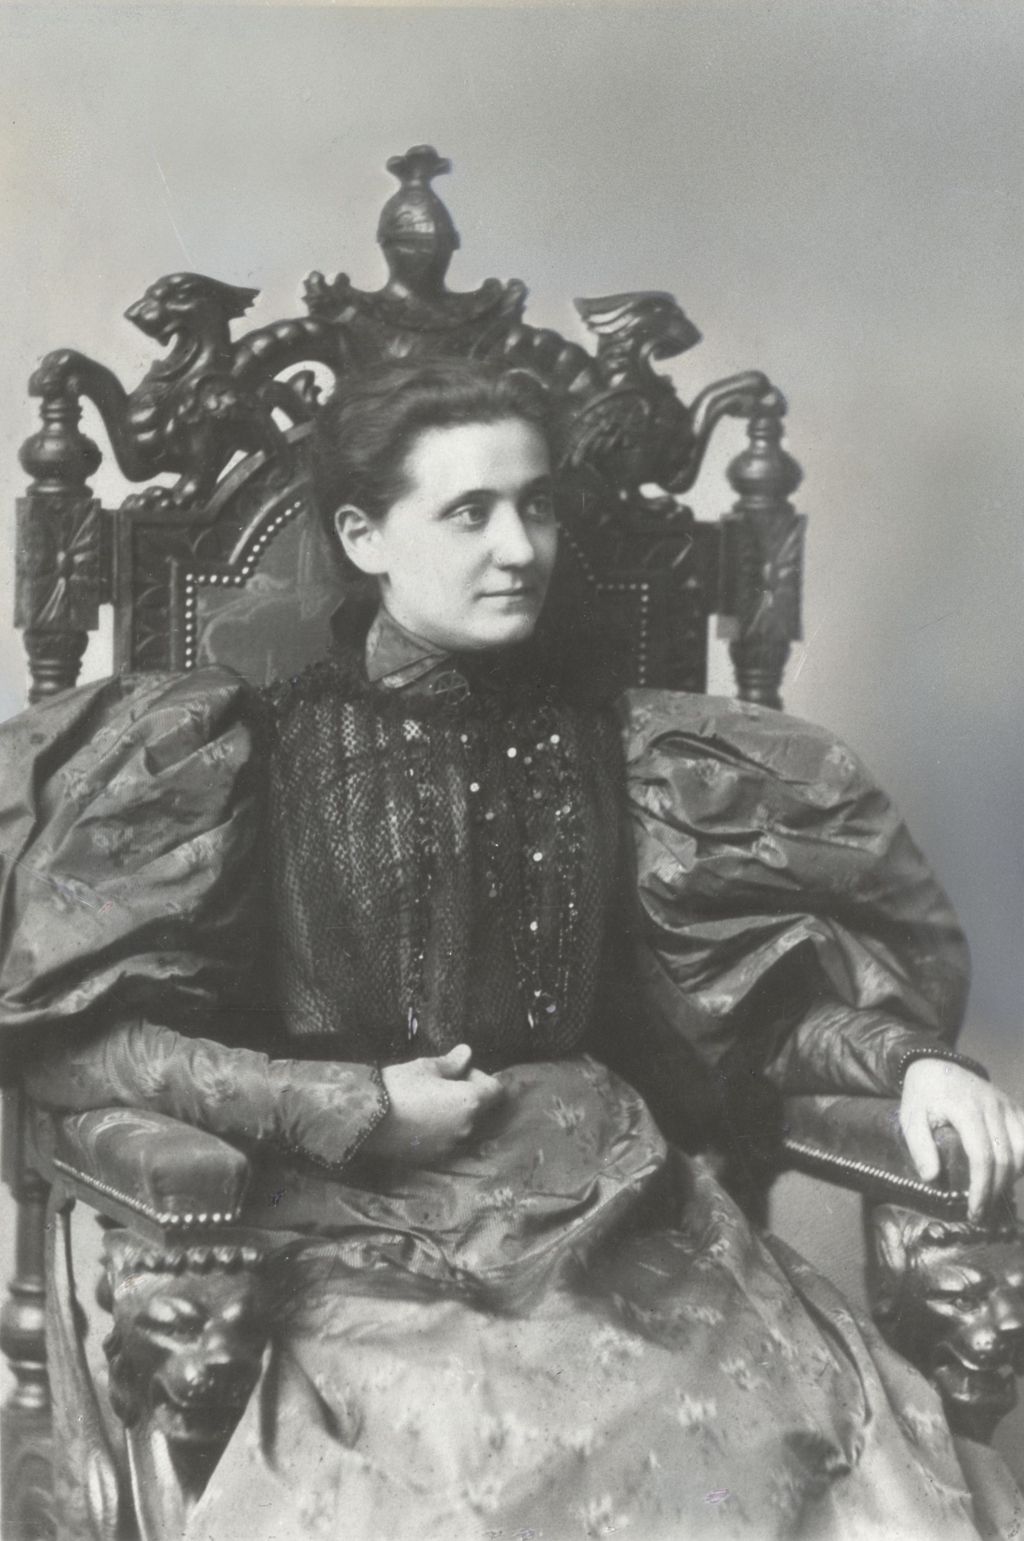 Jane Addams seated in ornate chair